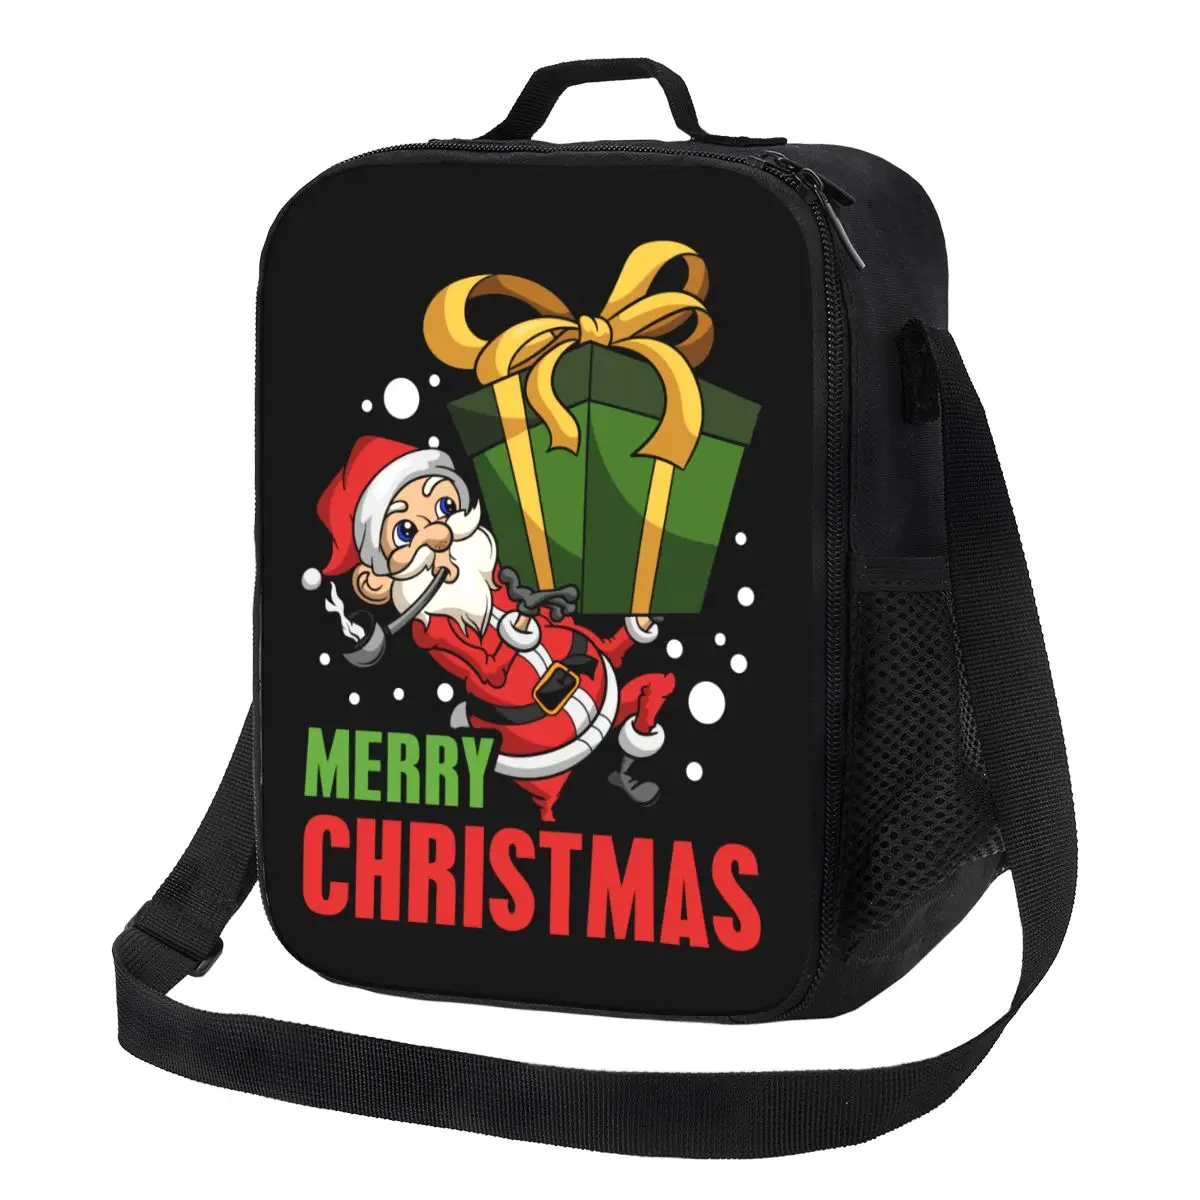 

Happy Santa Claus Thermal Lunch Bag Merry Christmas Festive Xmas Resuable Lunch Tote for Outdoor Camping Travel Bento Food Box